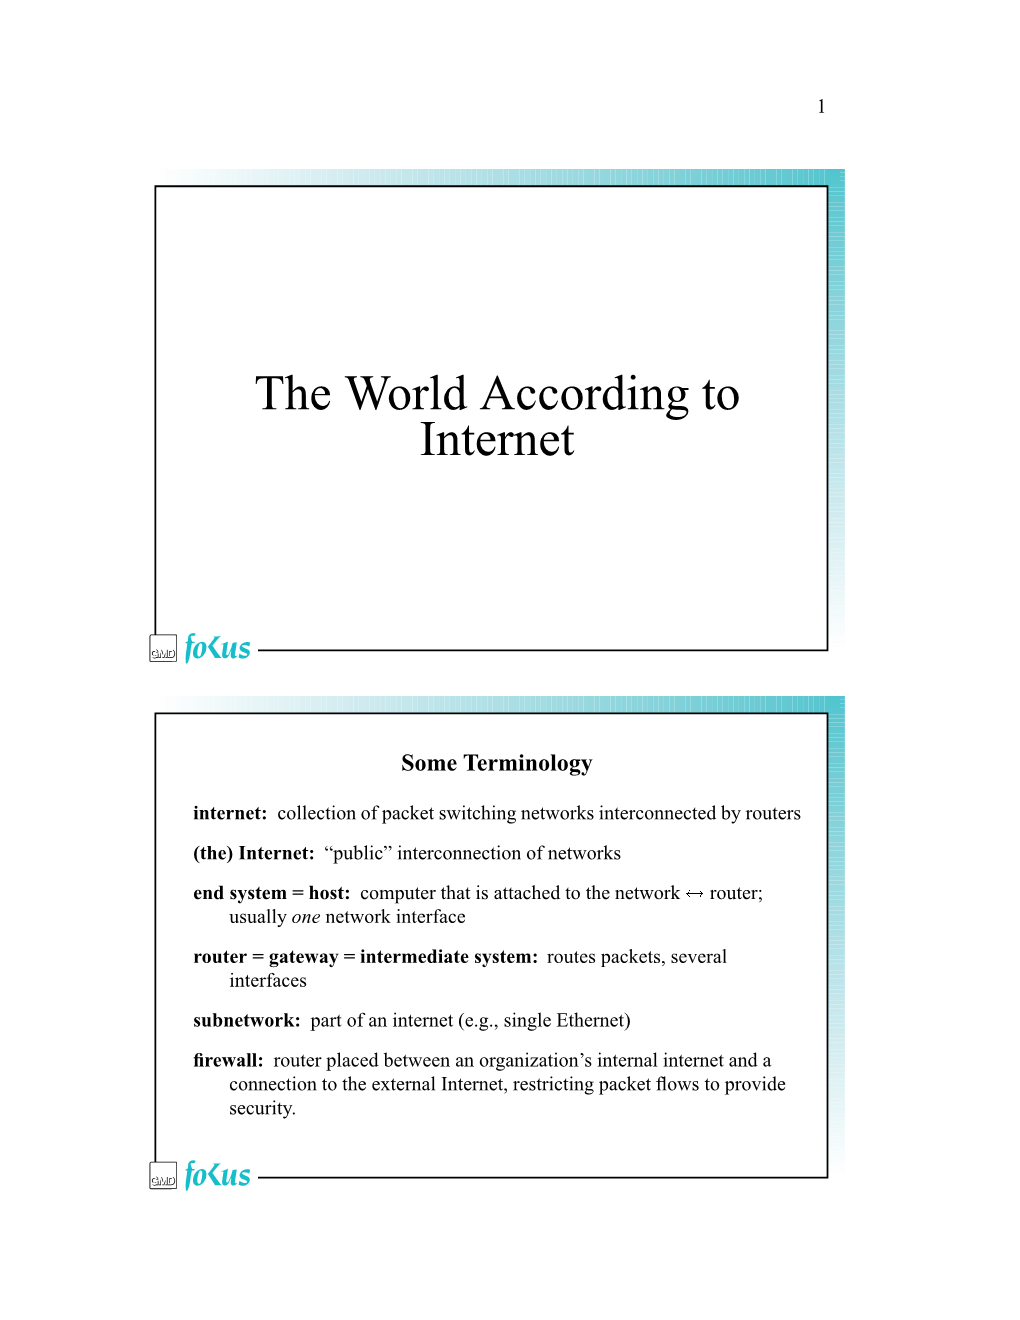 The World According to Internet